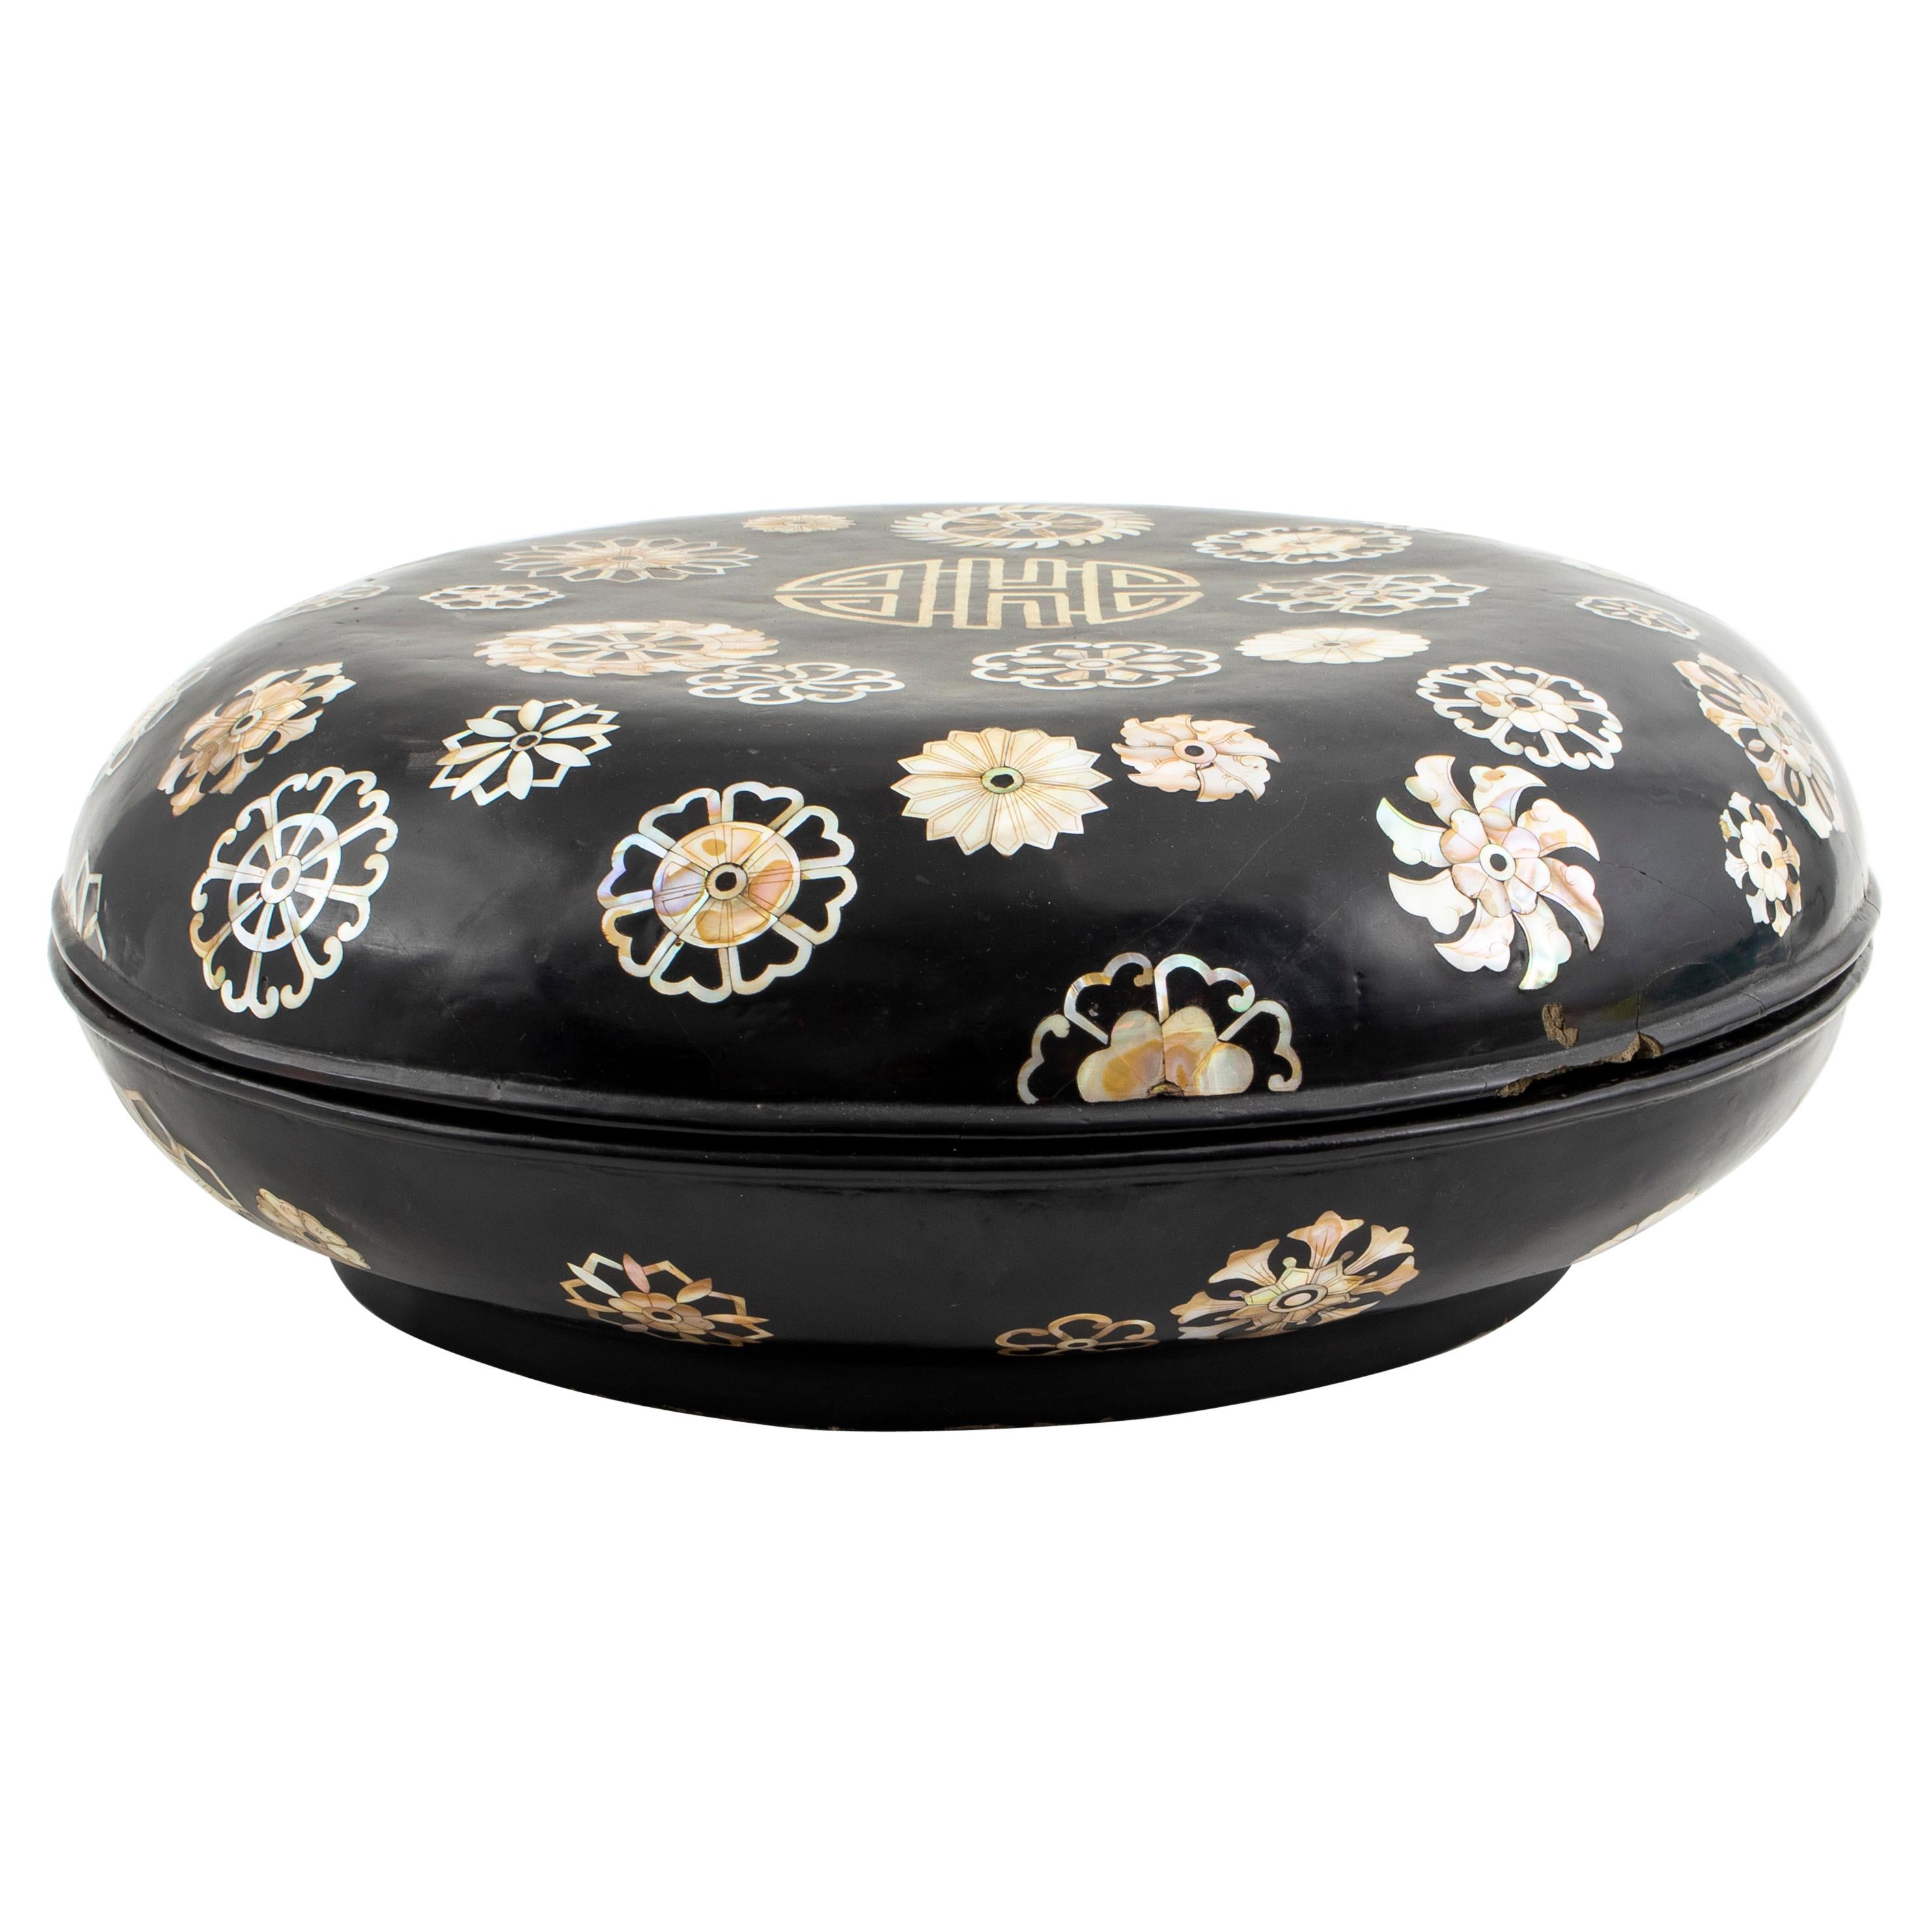 Korean Mother-of-Pearl Inlaid Lacquered Hardwood Lidded Bowl